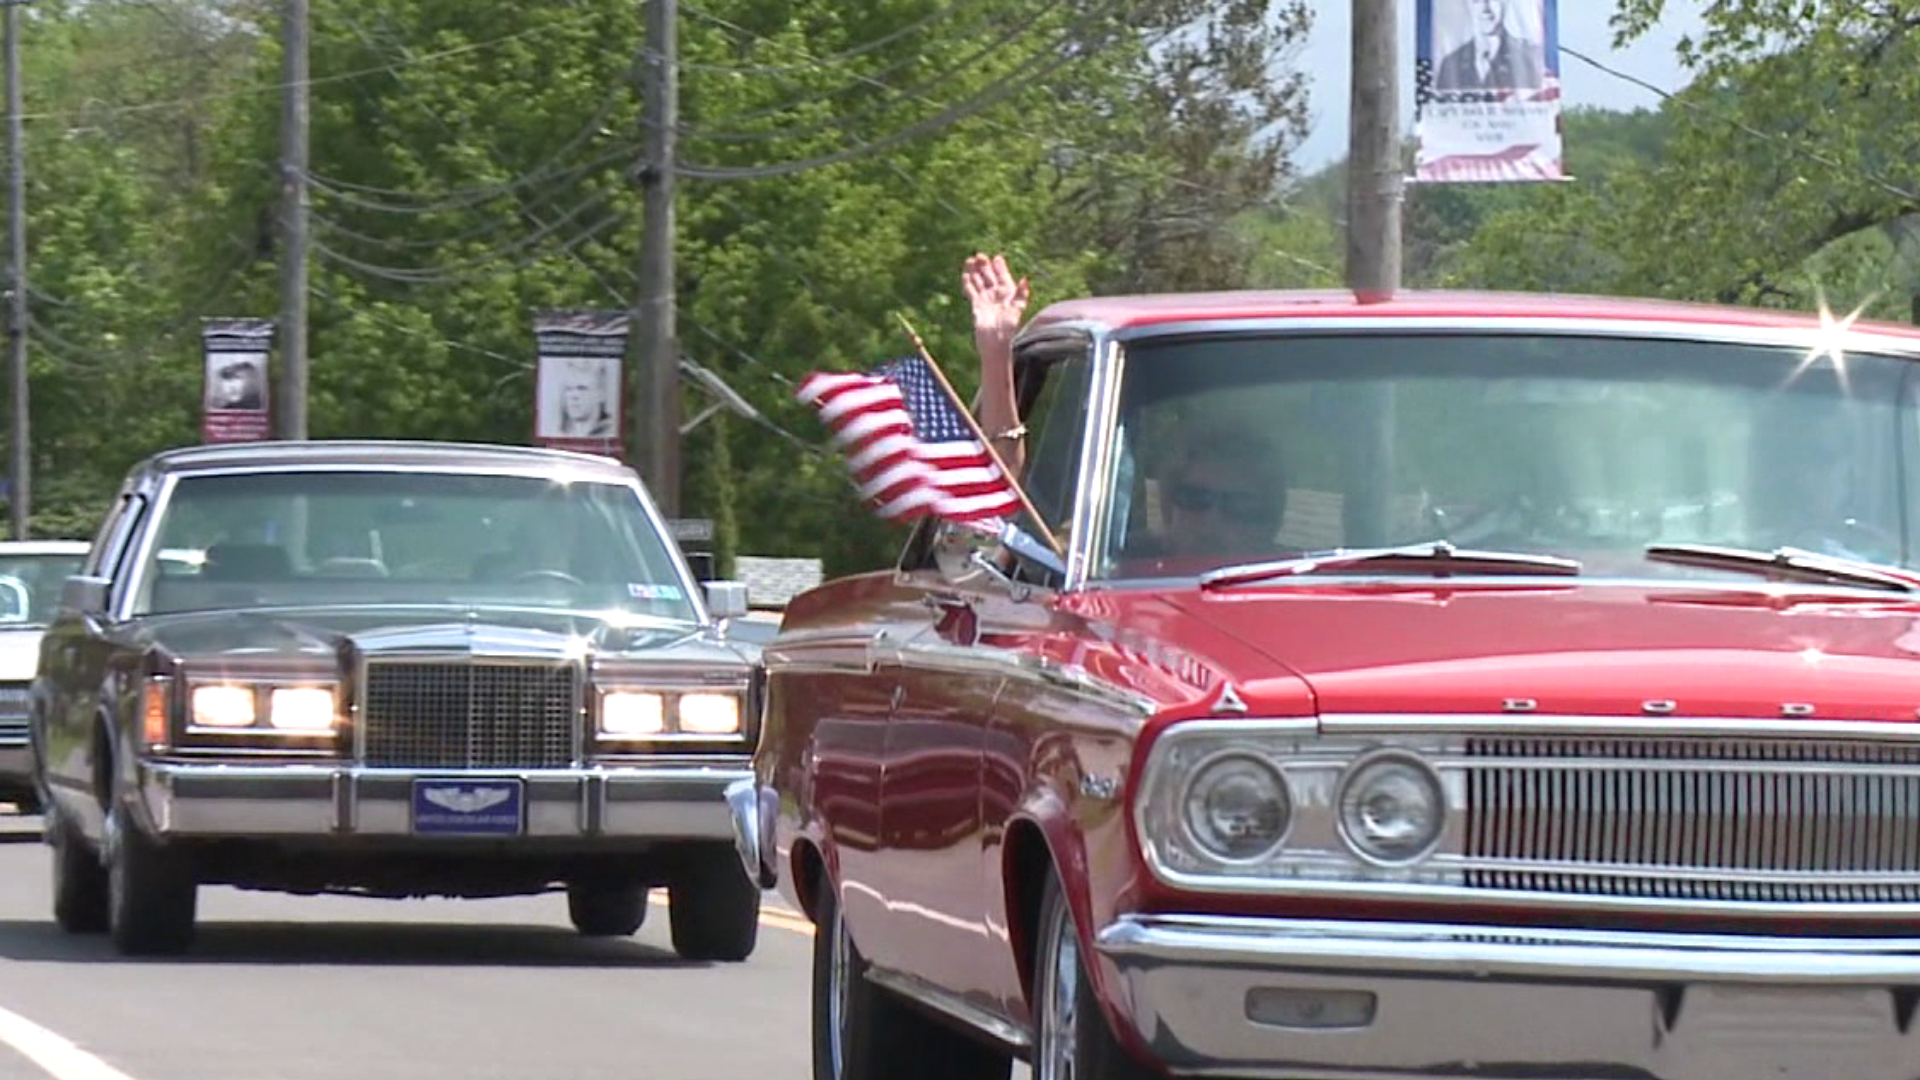 Everyone has their own way to observe Memorial Day. Some folks in Luzerne County believe today was about more than just remembering, but also reconnecting.